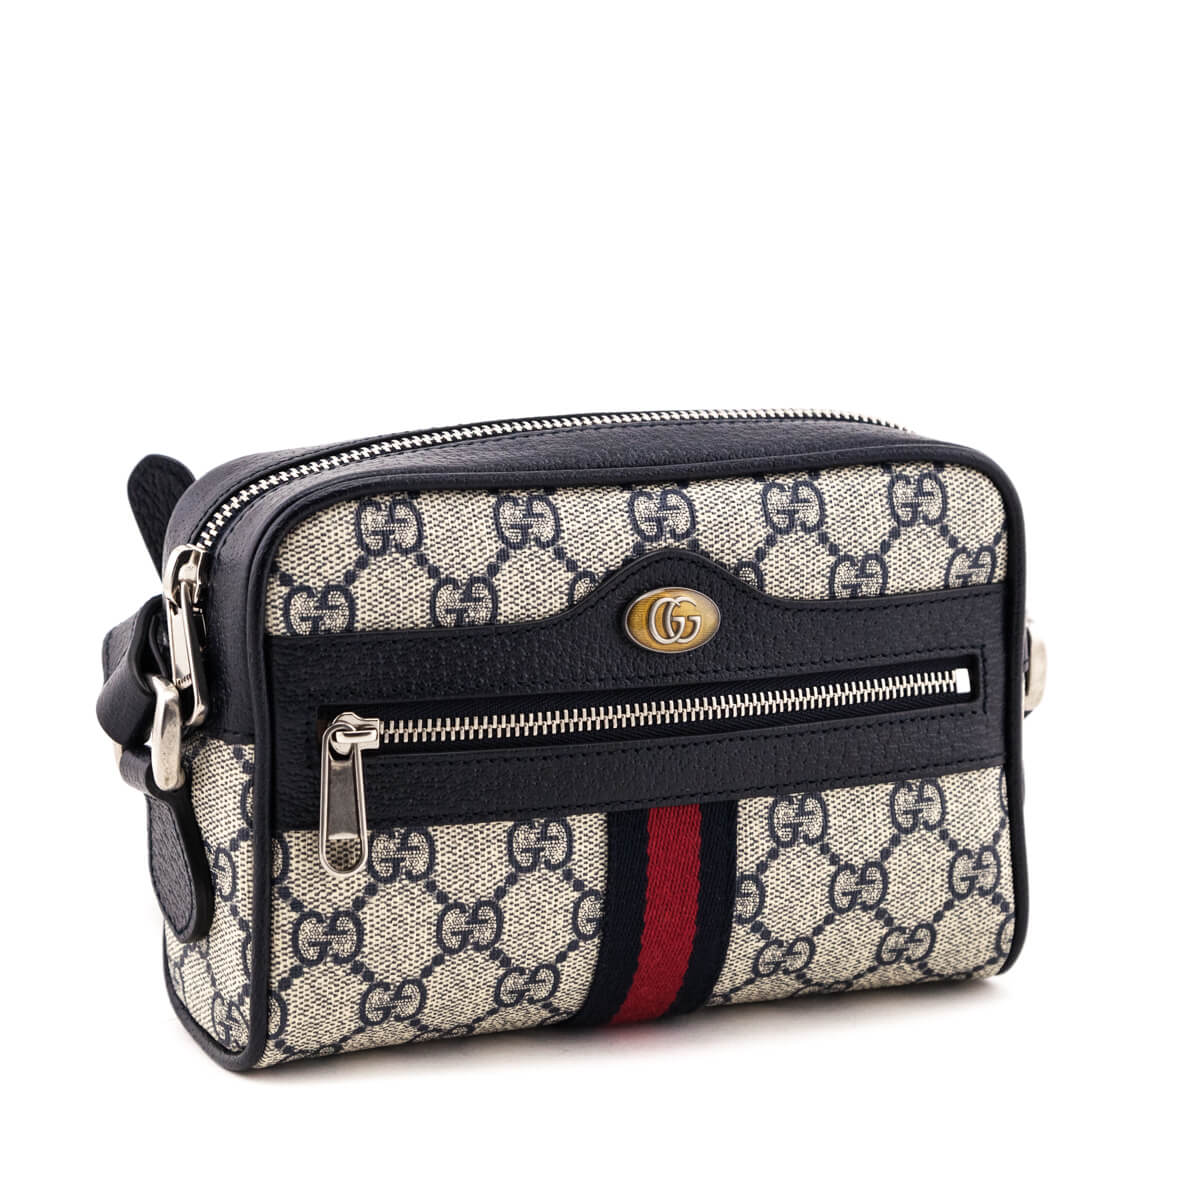 Gucci Navy GG Supreme Mini Ophidia GG Crossbody - Love that Bag etc - Preowned Authentic Designer Handbags & Preloved Fashions